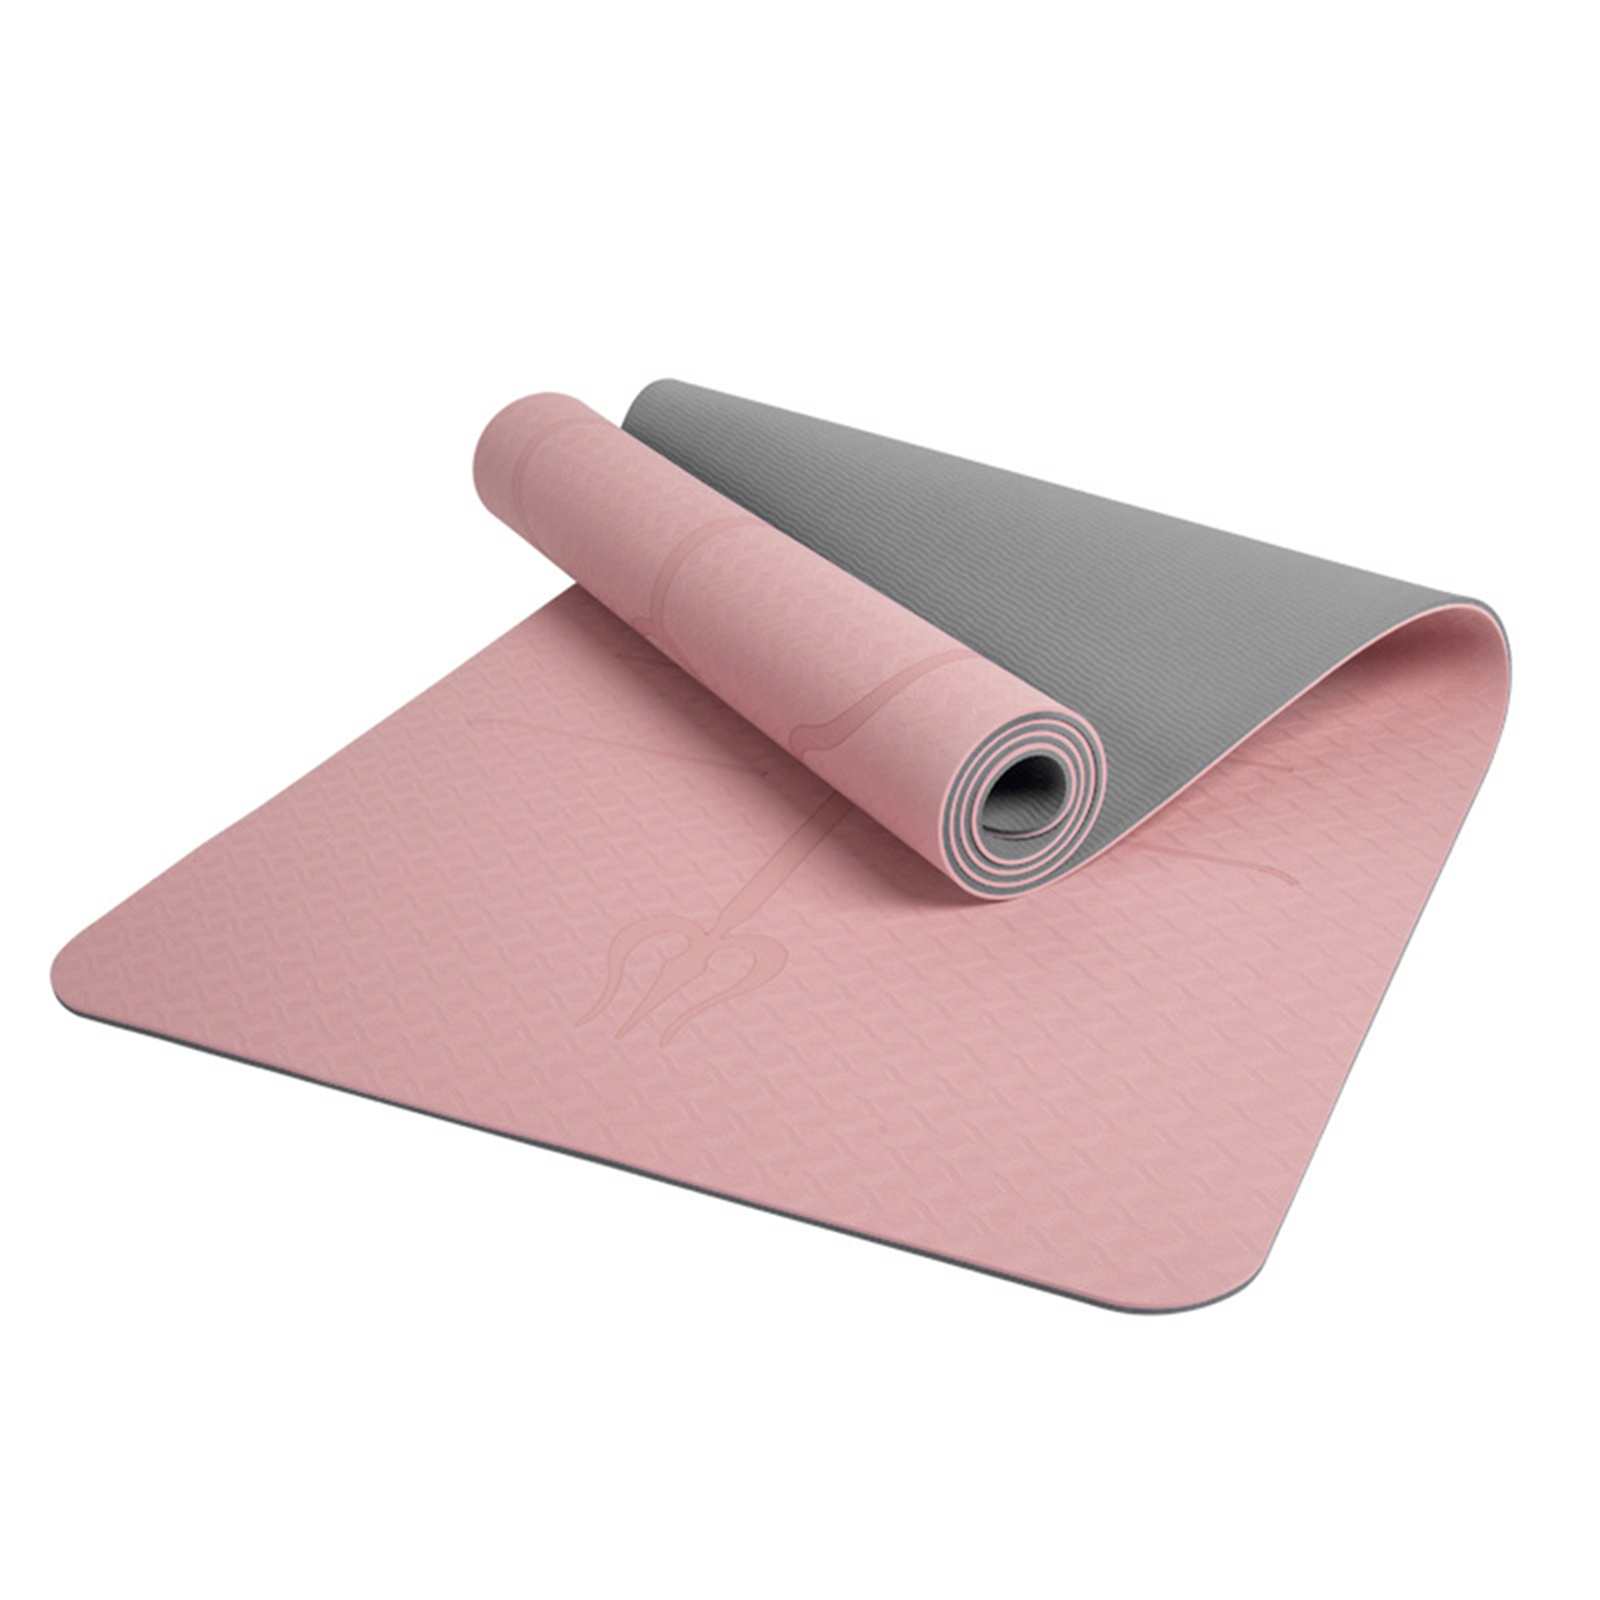 Non-Slip Yoga Mat With Alignment Marks Width 80cm TPE Exercise Fitness Mat For Home Workout Outdoors Travel Pink + Gray 183 x 80 x 0.6cm